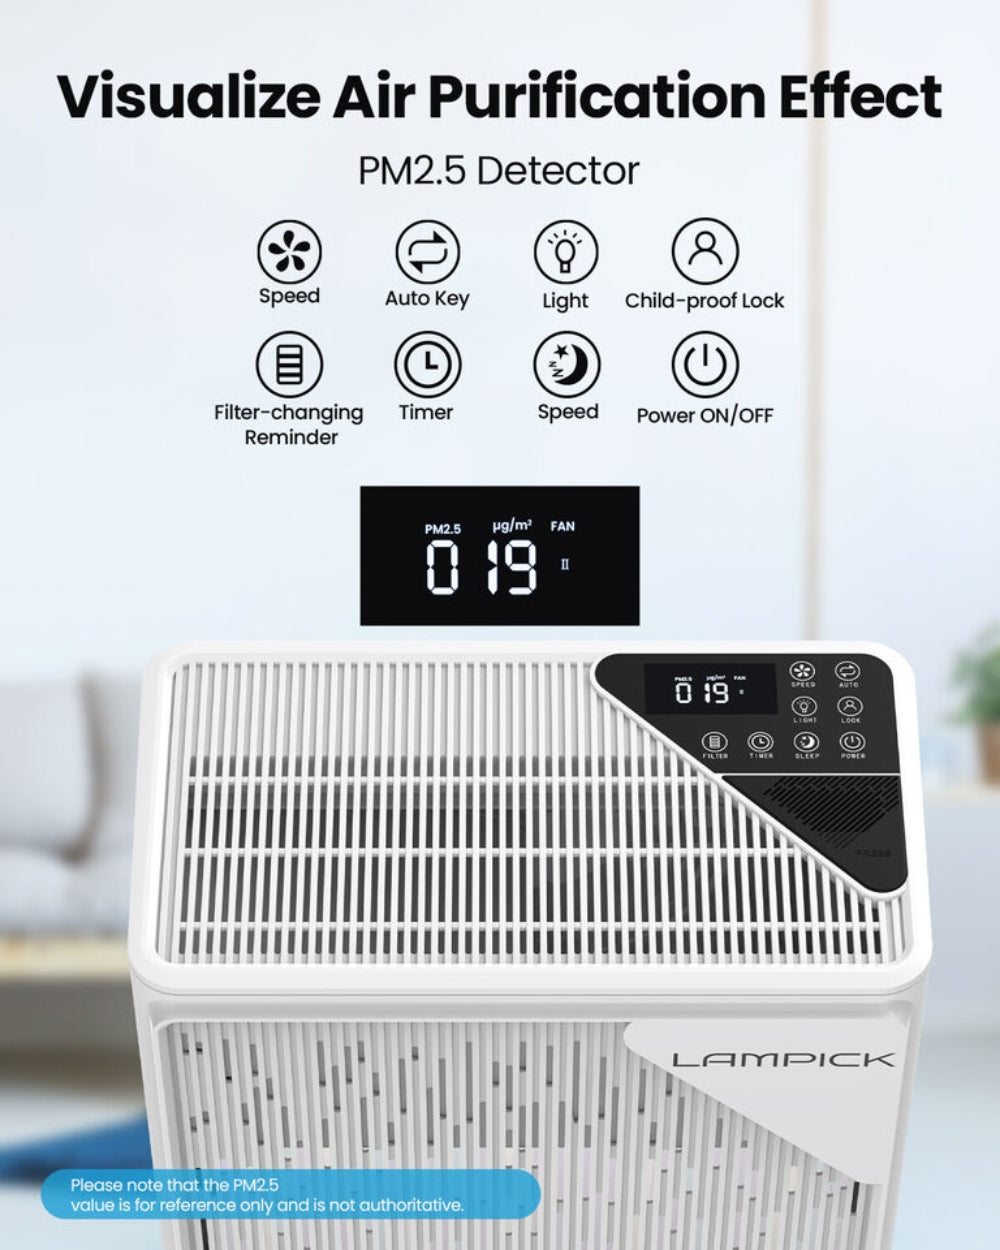 Air Purifiers for Home Large Room Up to 1736 sqft, HEPA Air Purifier with Meteor Shower Atmosphere Light, Fragrance Sponge, PM2.5 Detector Air